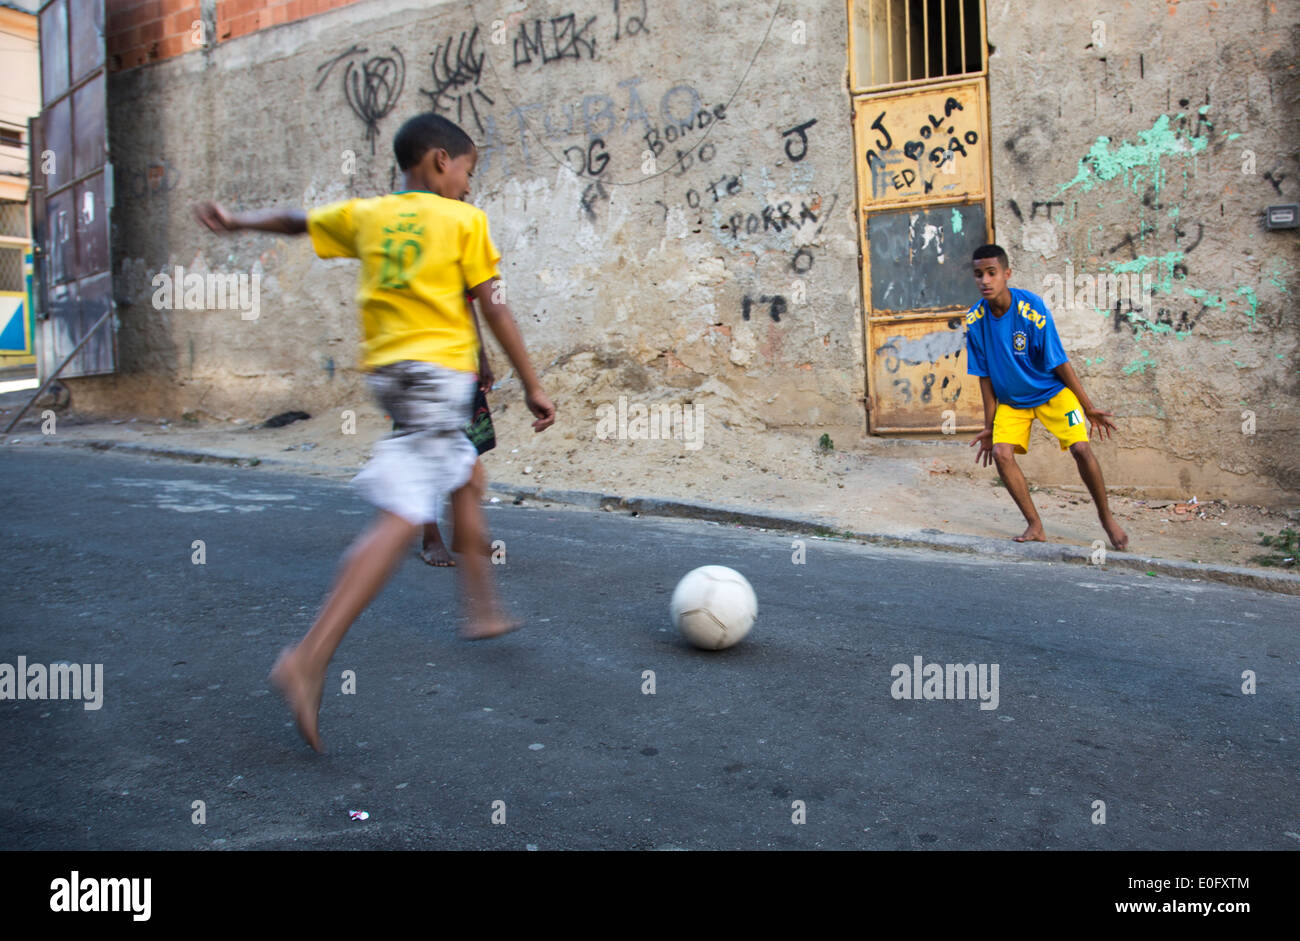 Gorgeous Photos Of Kids Playing Soccer In Brazils Slums